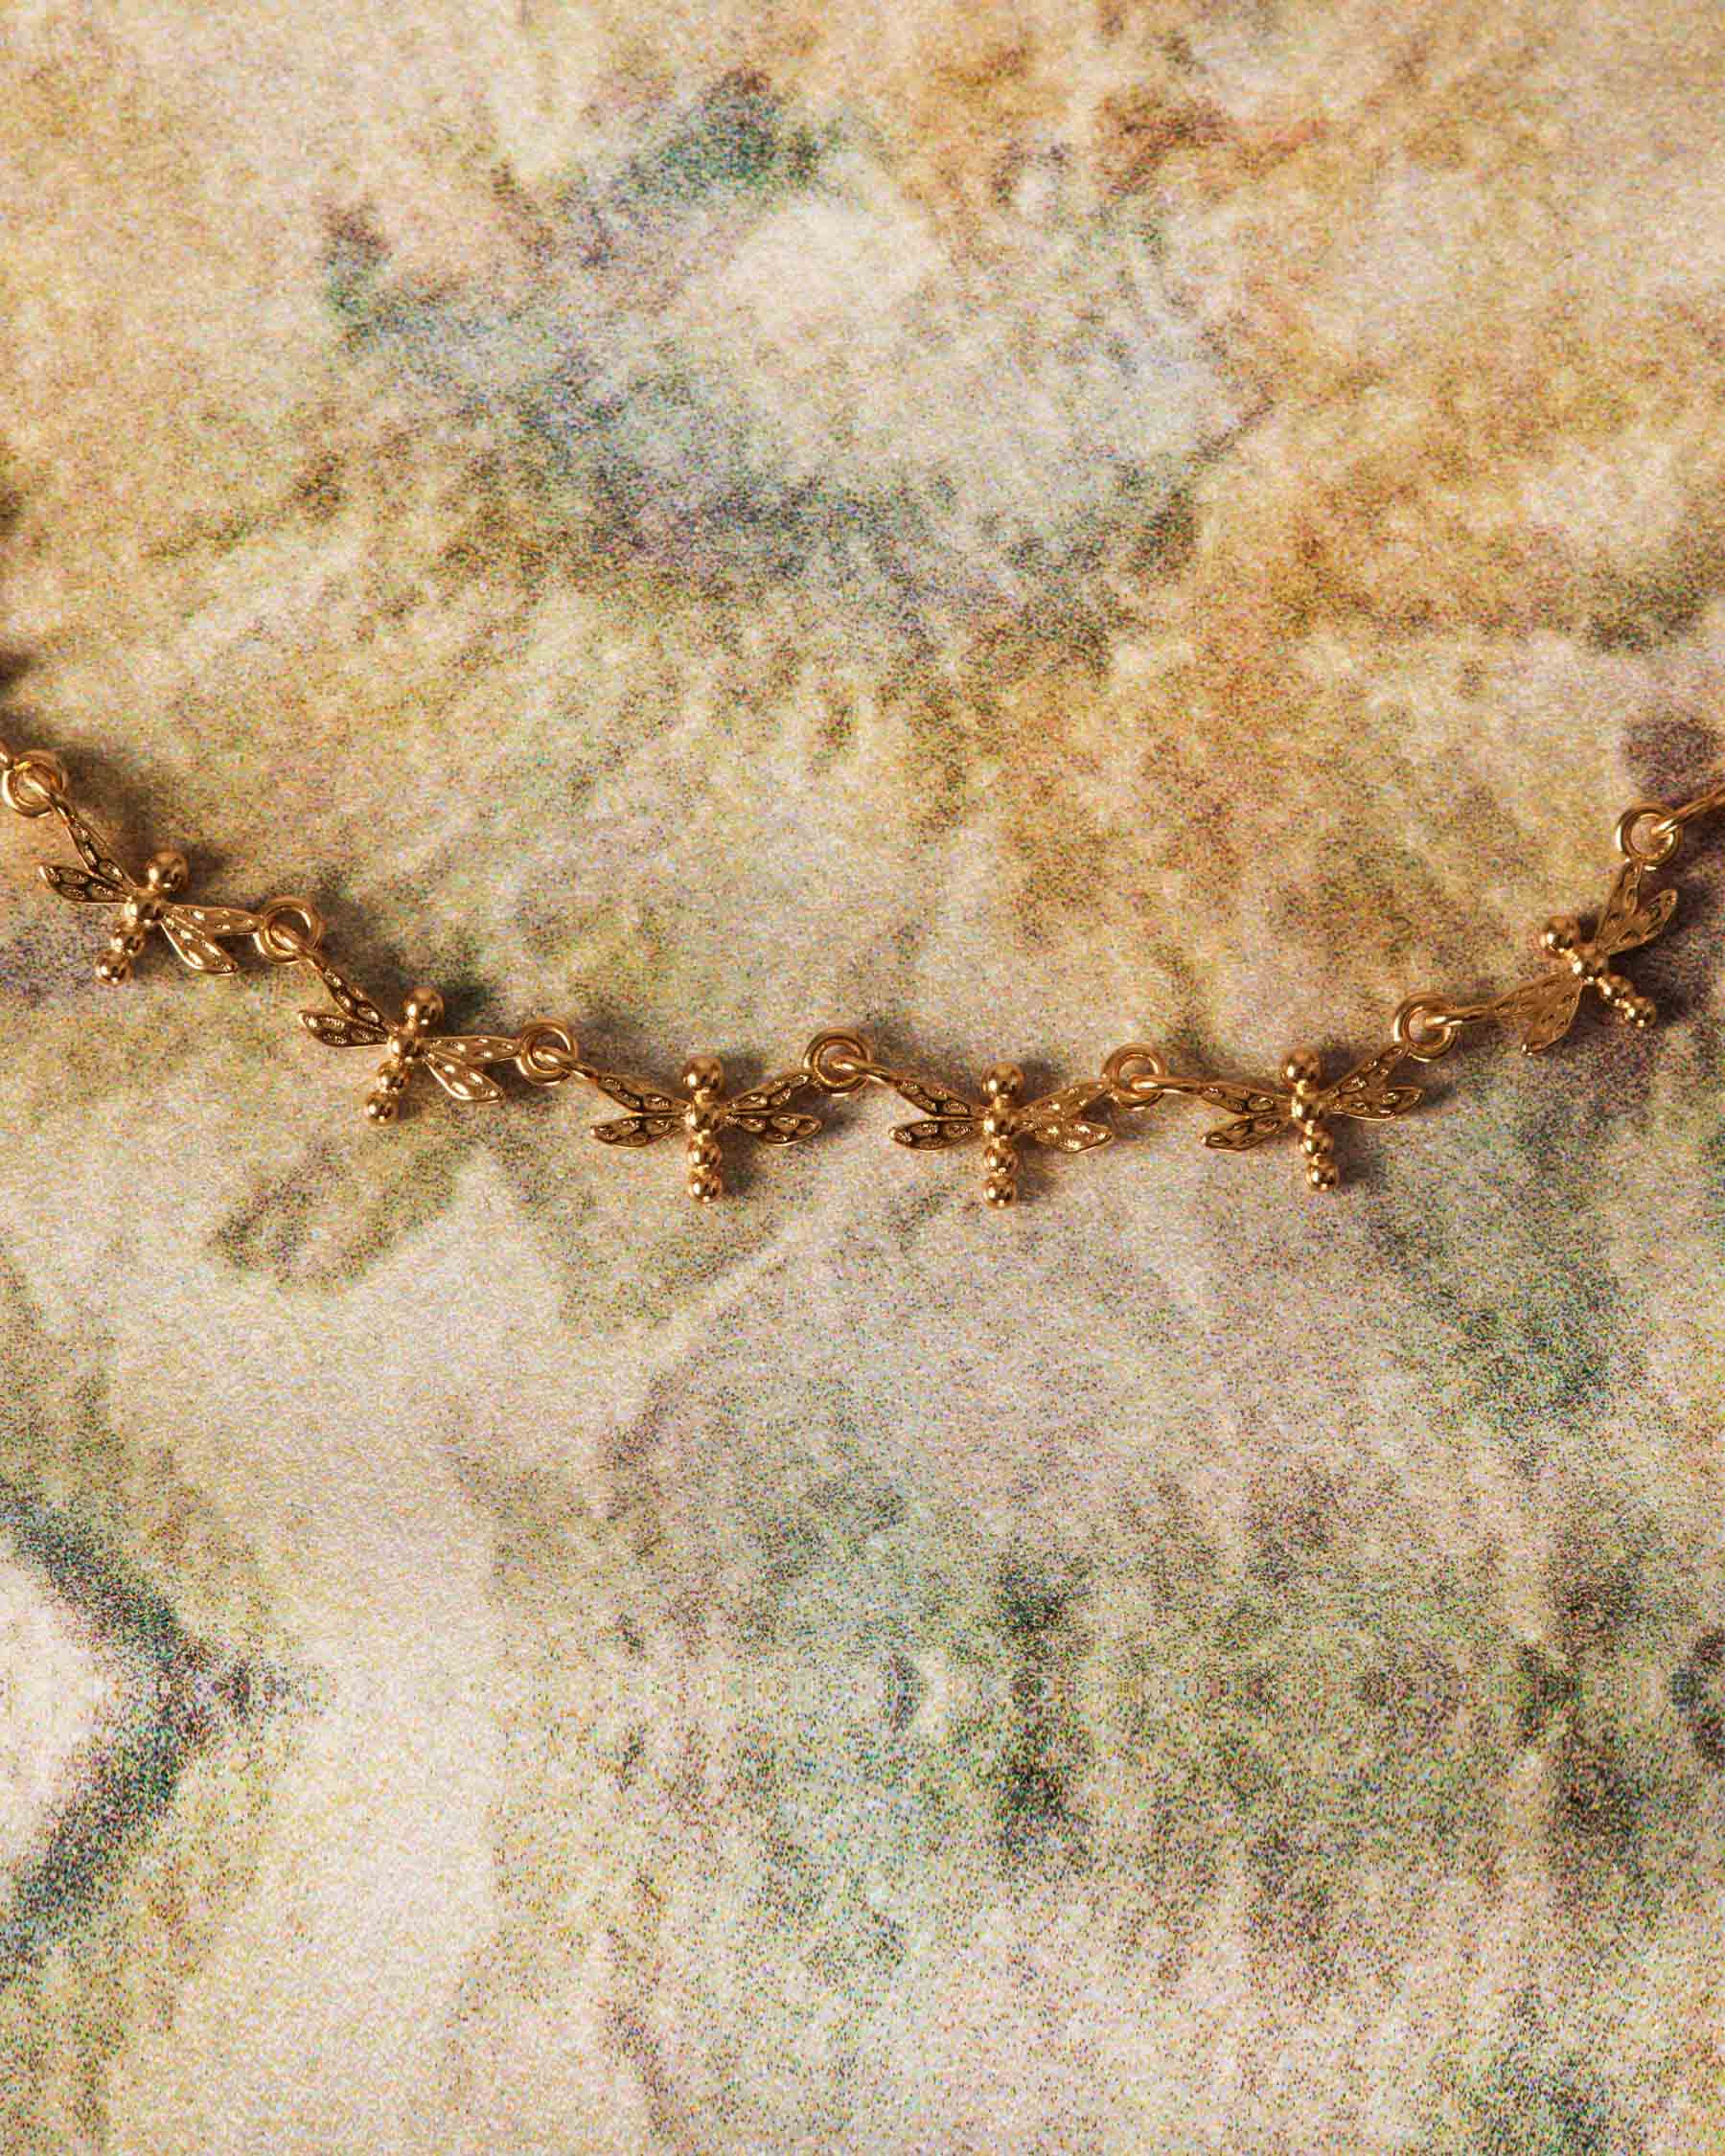 Collar Linked Dragonfly